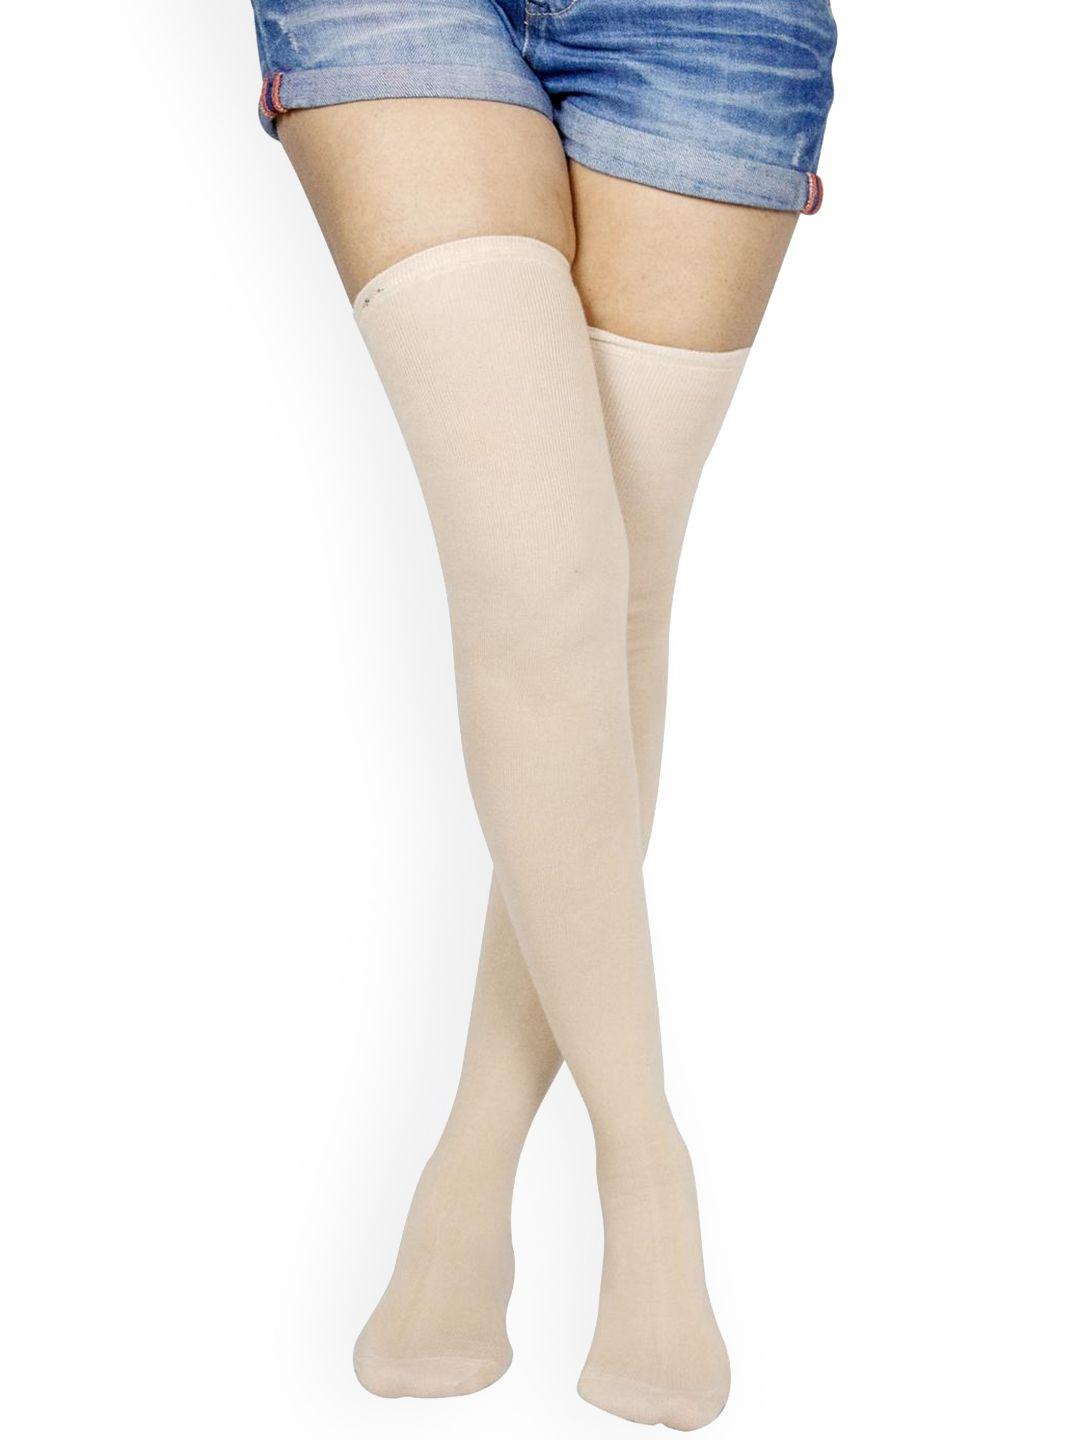 baesd cotton patterned extremely lightweight thigh-high stockings